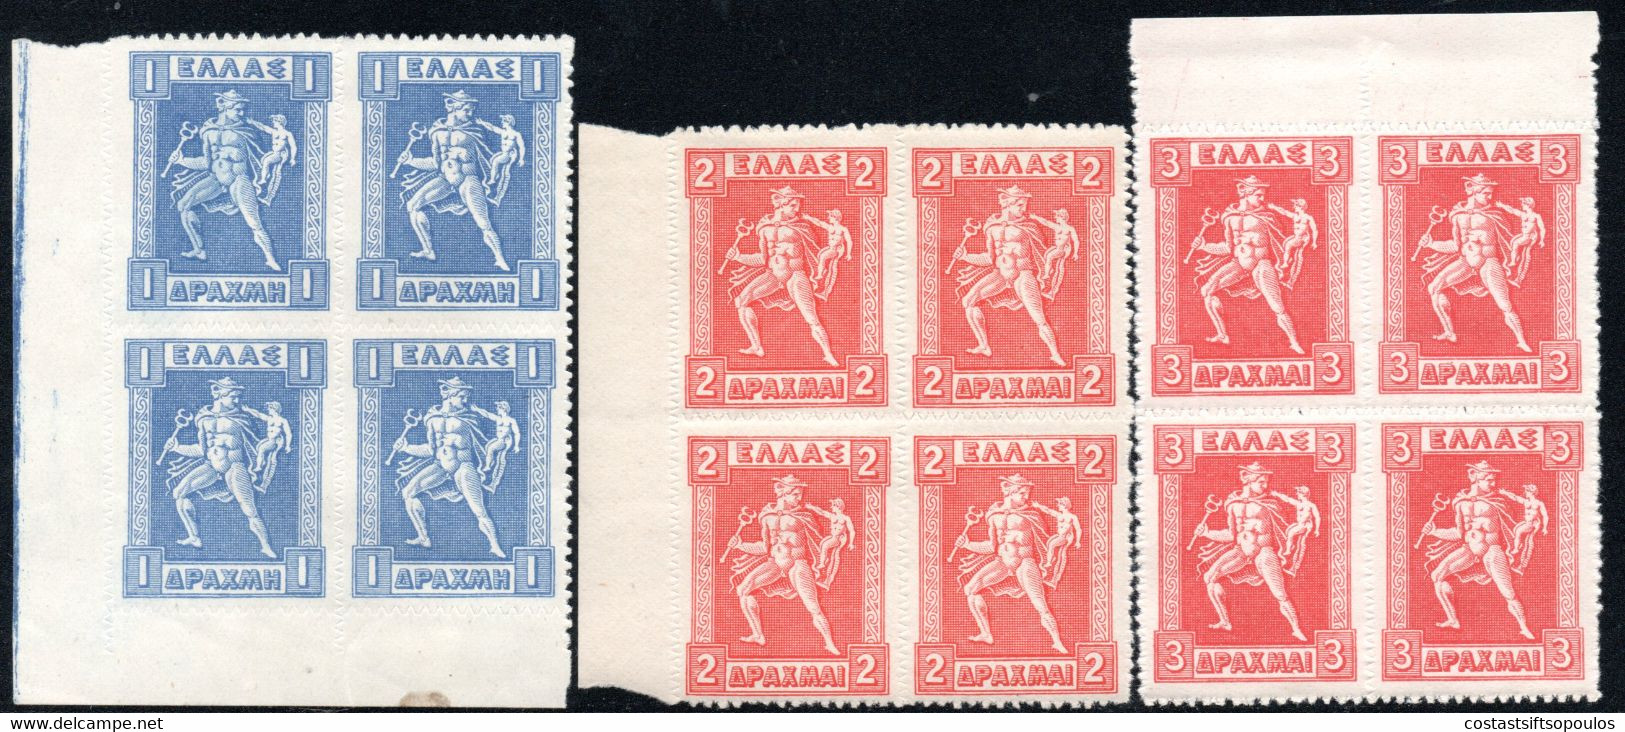 932.GREECE.1912-1923 LITHO Y.T.194A-198L,SC.214-231 MNH BLOCKS OF 4,2-3 VERY LIGHT WRINKLES NOT AFFECTING PAPER.5 SCANS - Blocs-feuillets